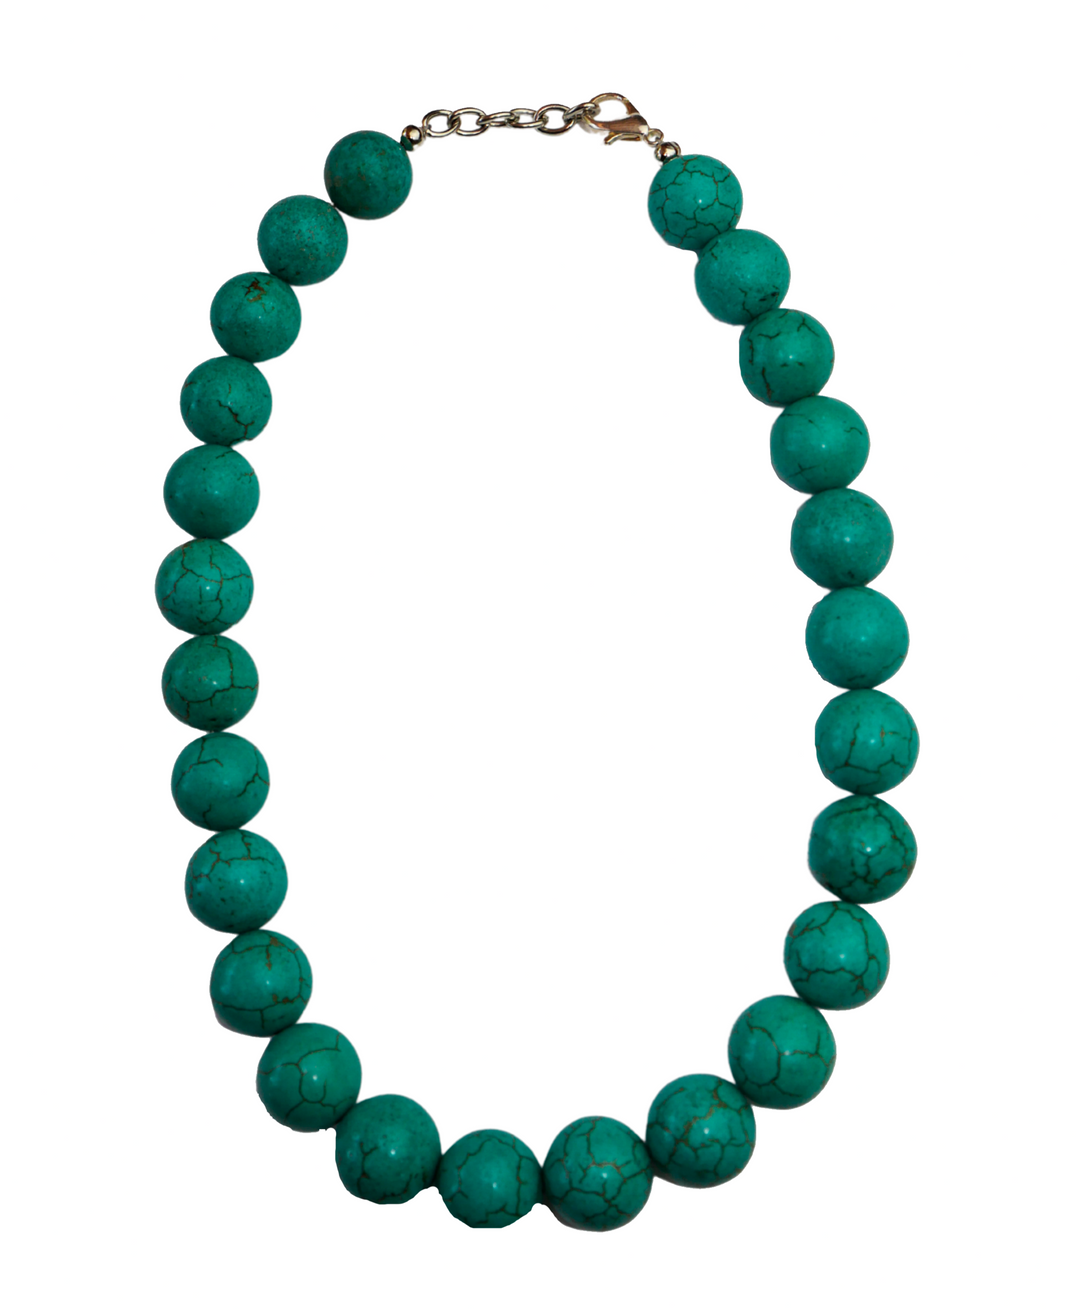 TURQUOISE BEAD NECKLACE